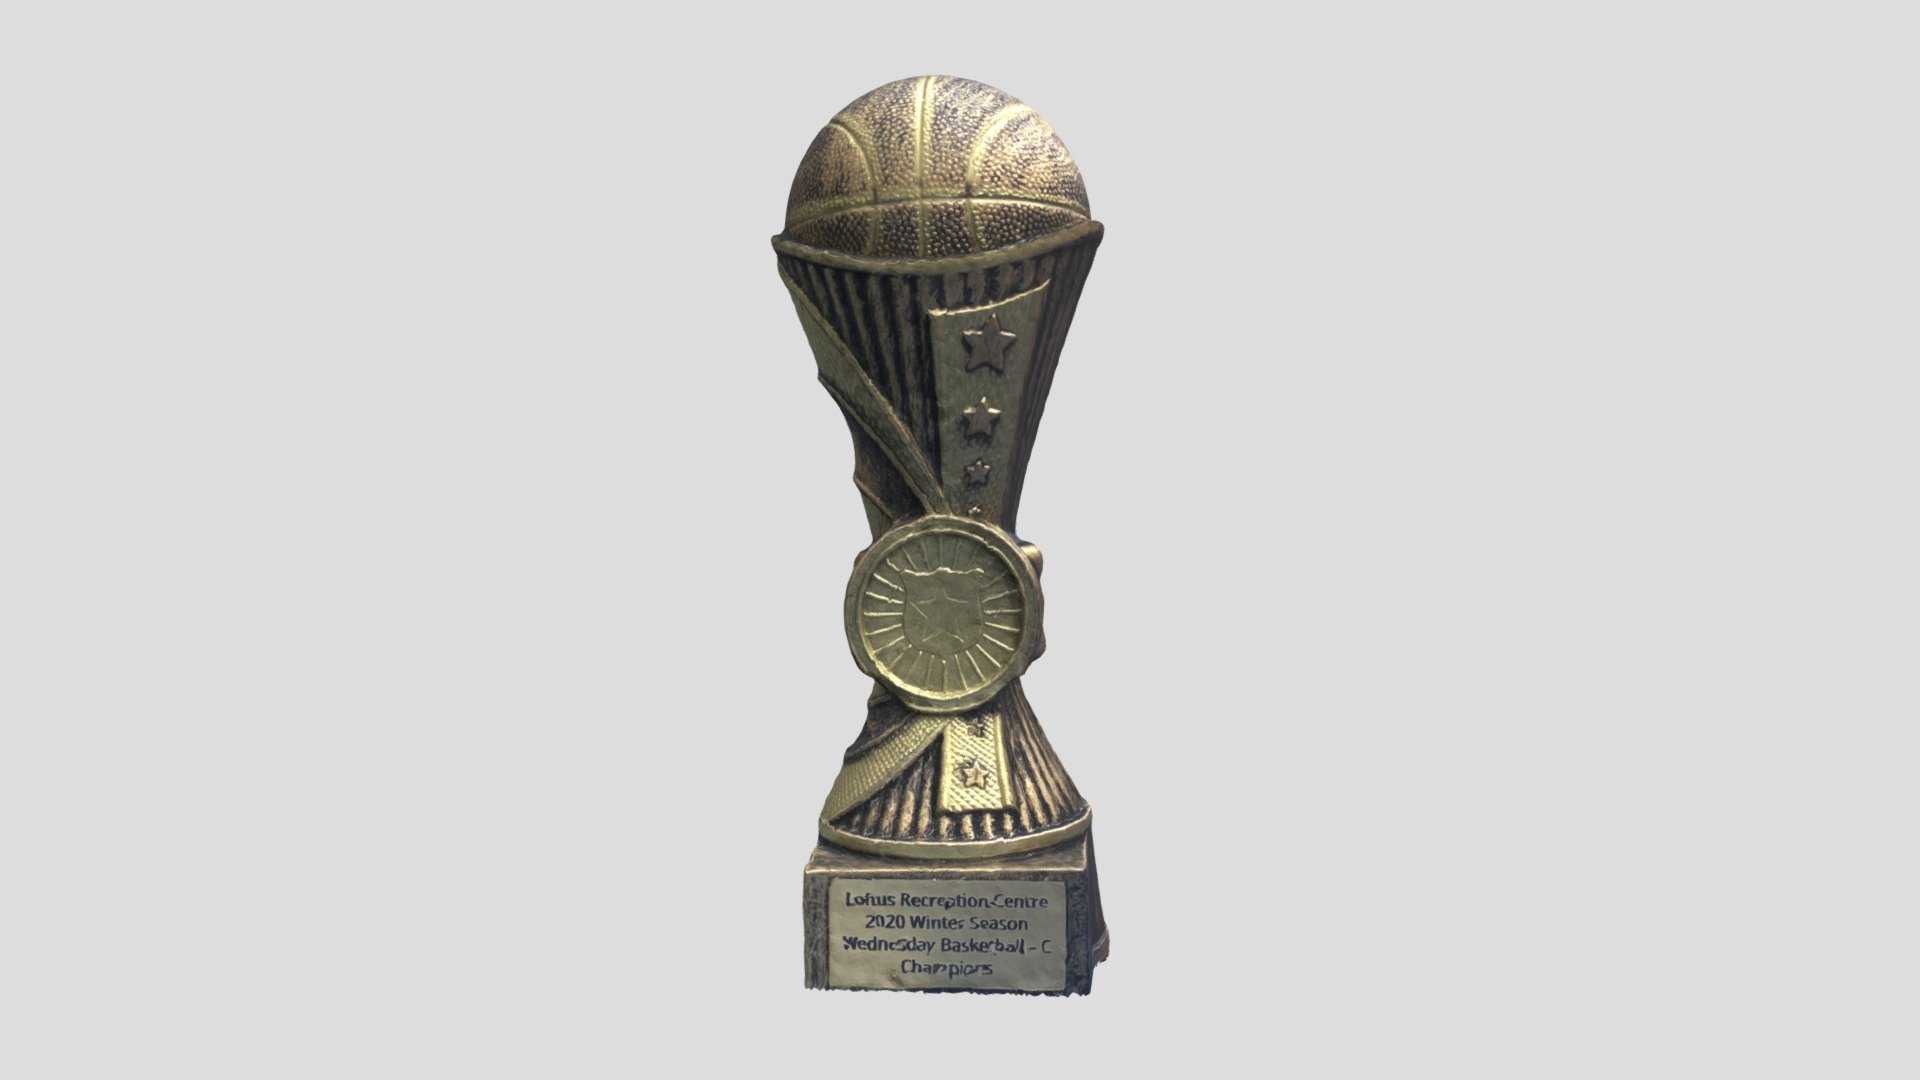 7,337 Championship Basketball Trophy Images, Stock Photos, 3D